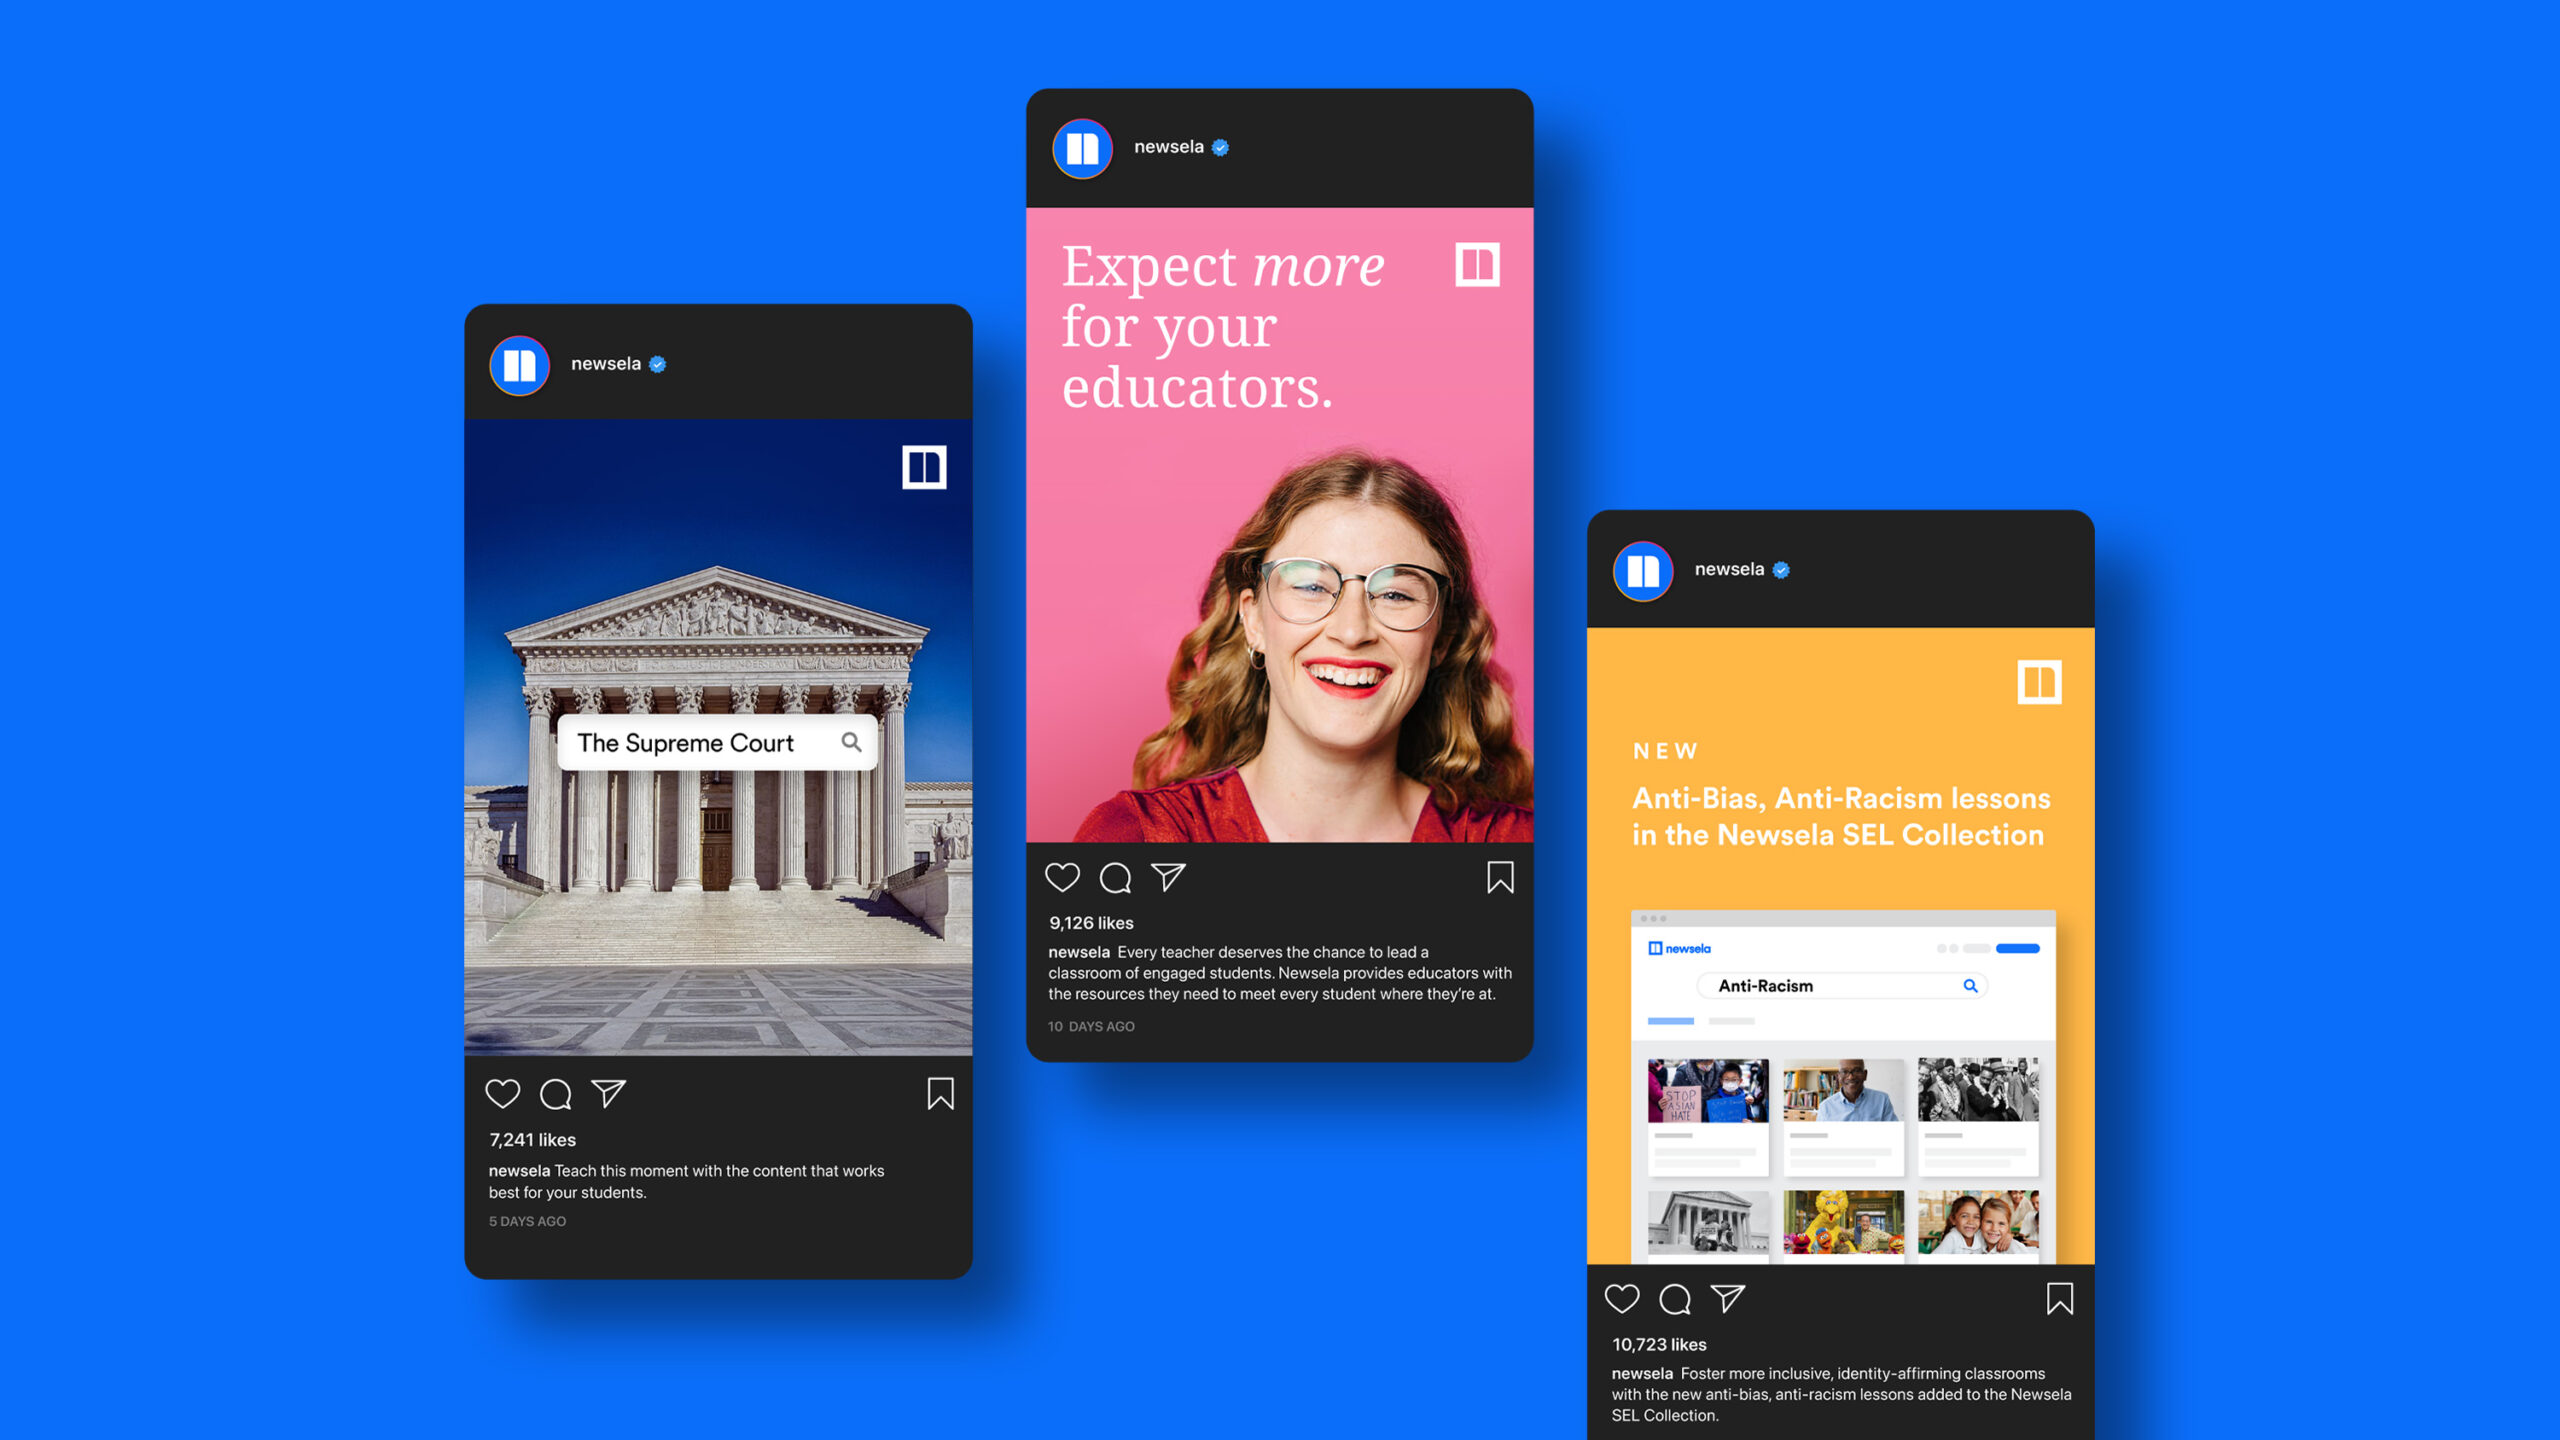 Newsela social posts with brand photography and UI elements.